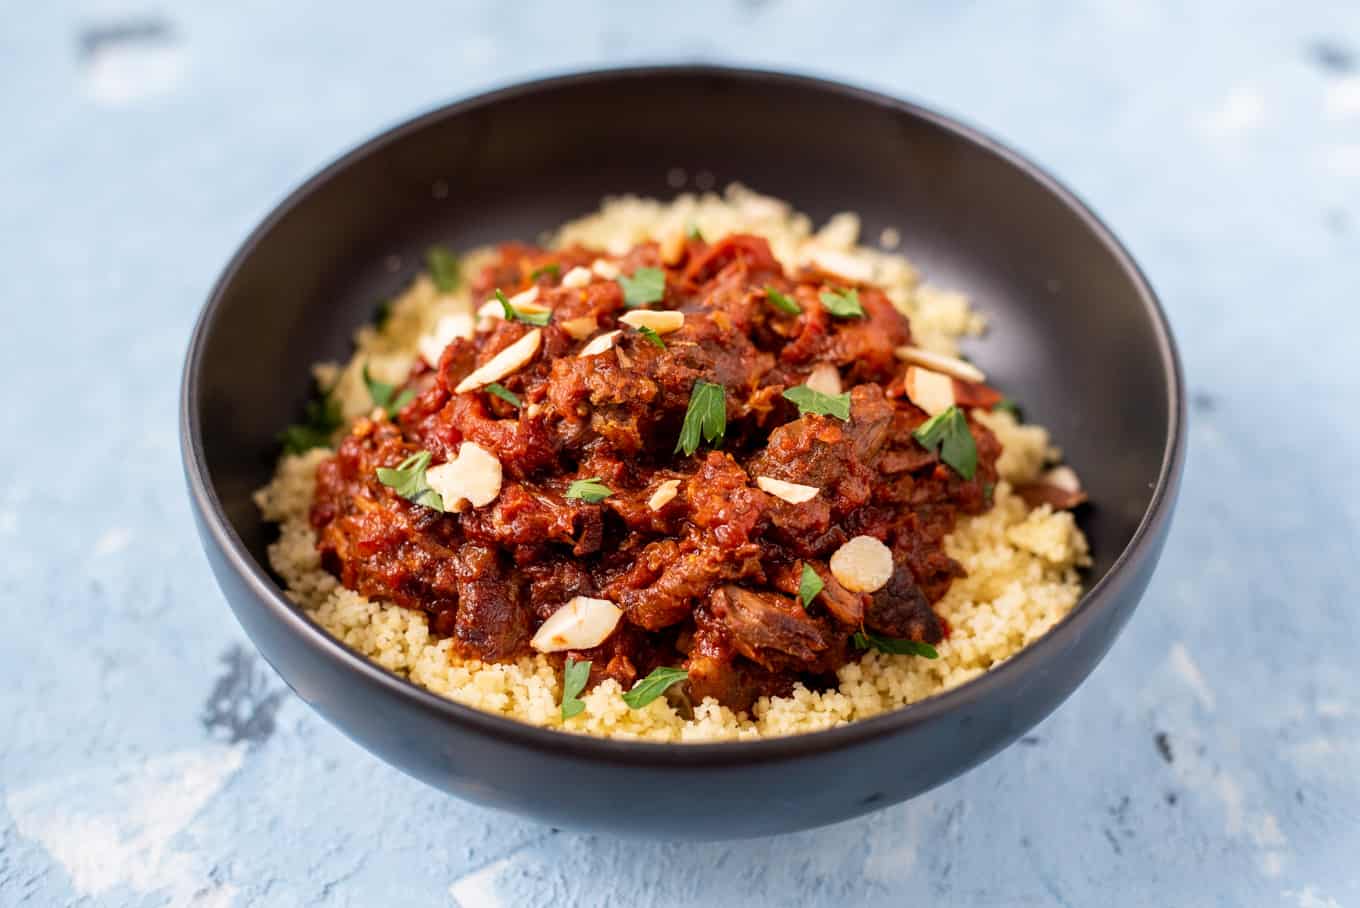 A close-up of lamb tagine in a bowl.